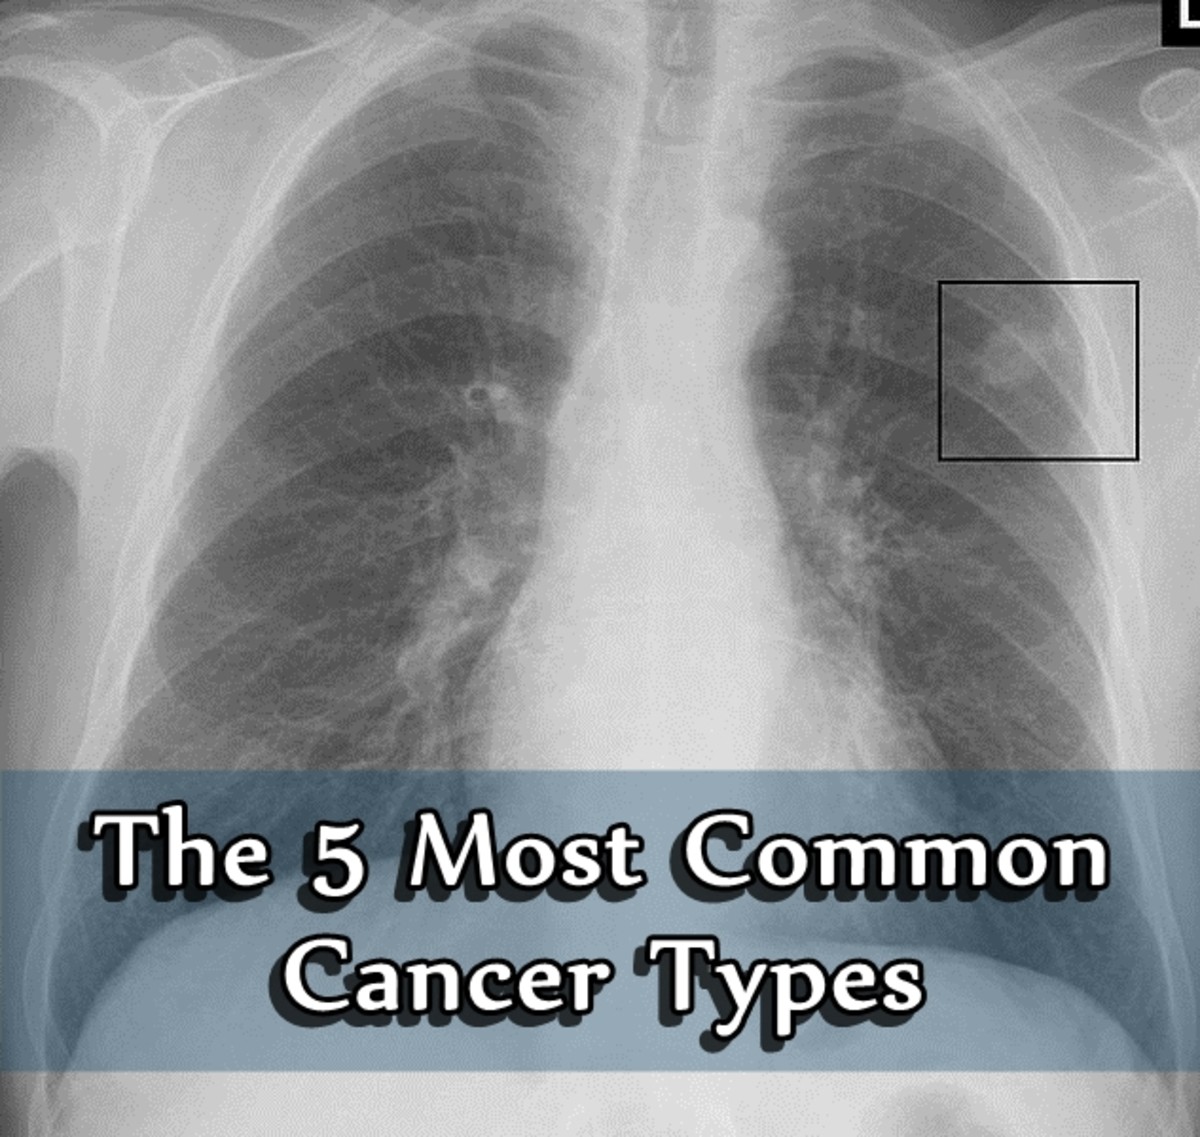 The 5 Most Common Cancer Types